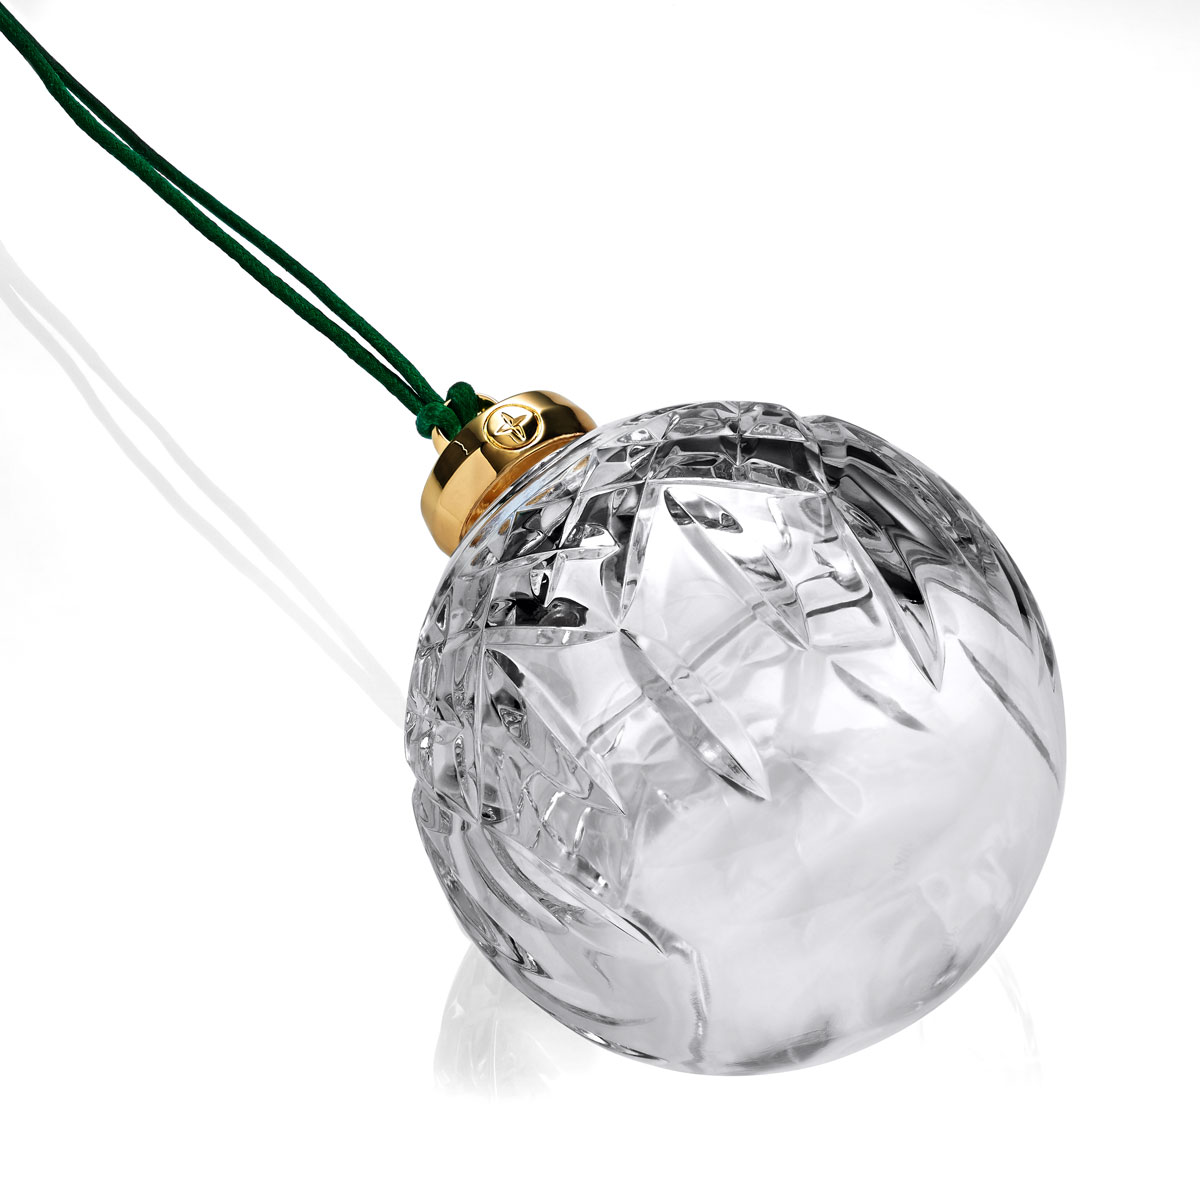 Waterford 2024 Lismore Bauble Ornament, Clear